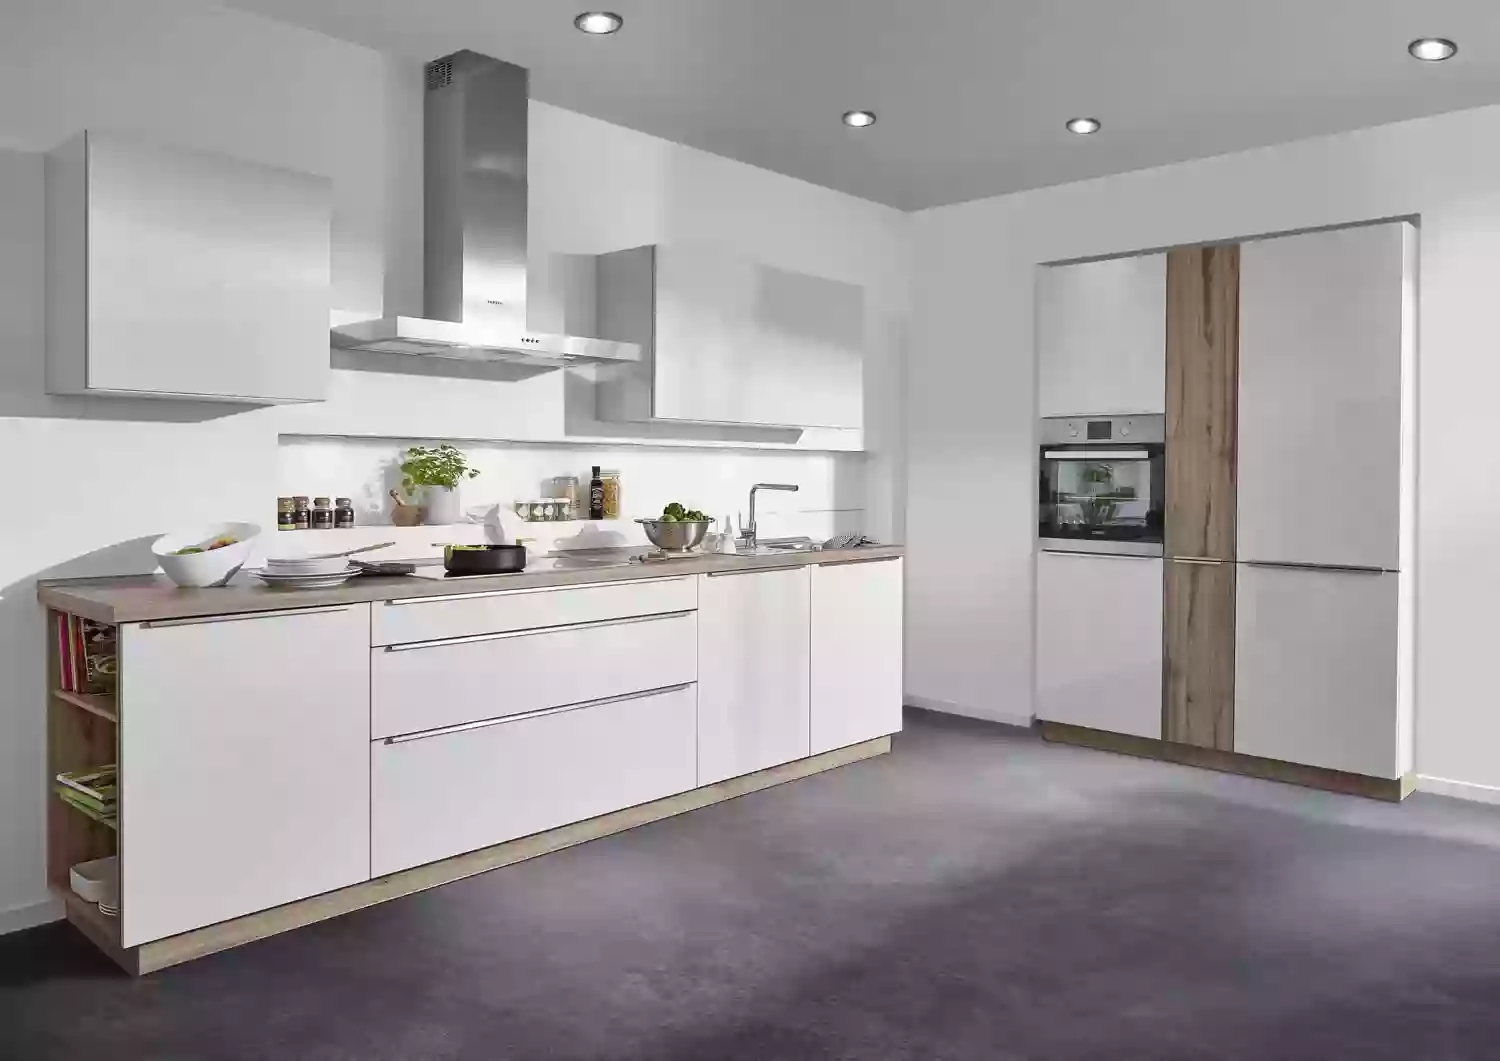 Affordable German Kitchens Competitive Prices Superior Quality